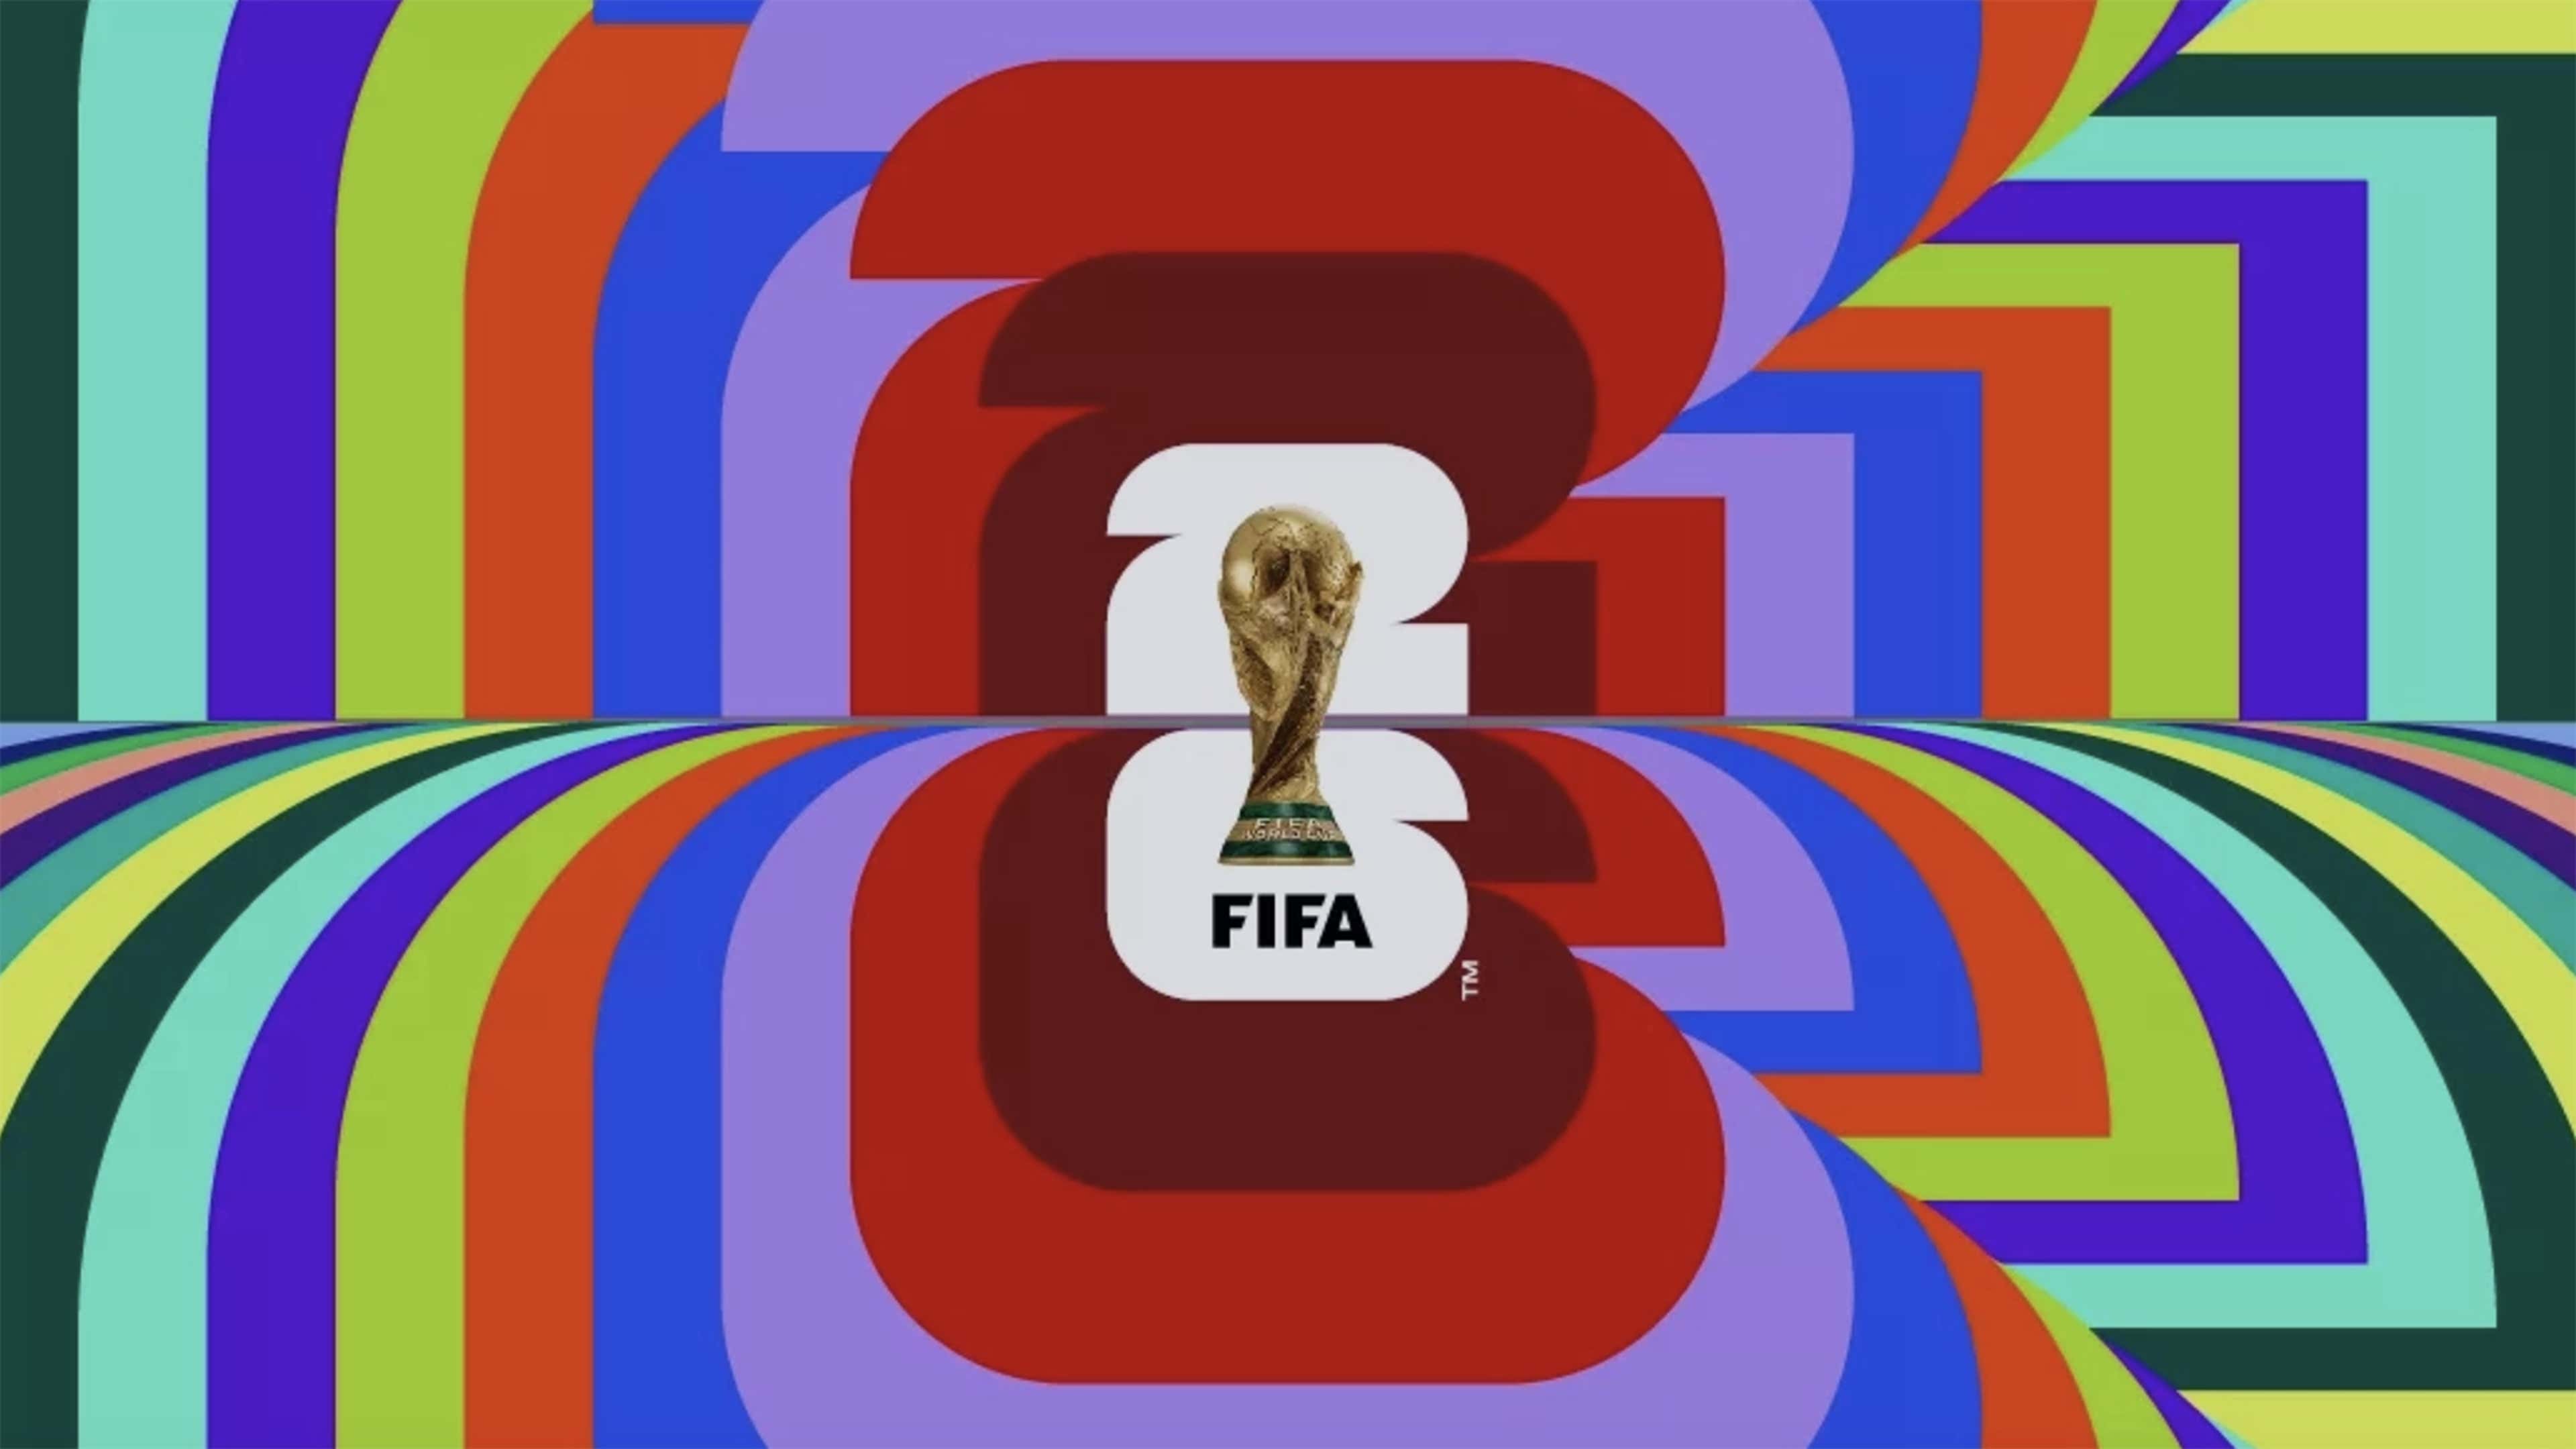 How to Draw LOGO FIFA World Cup